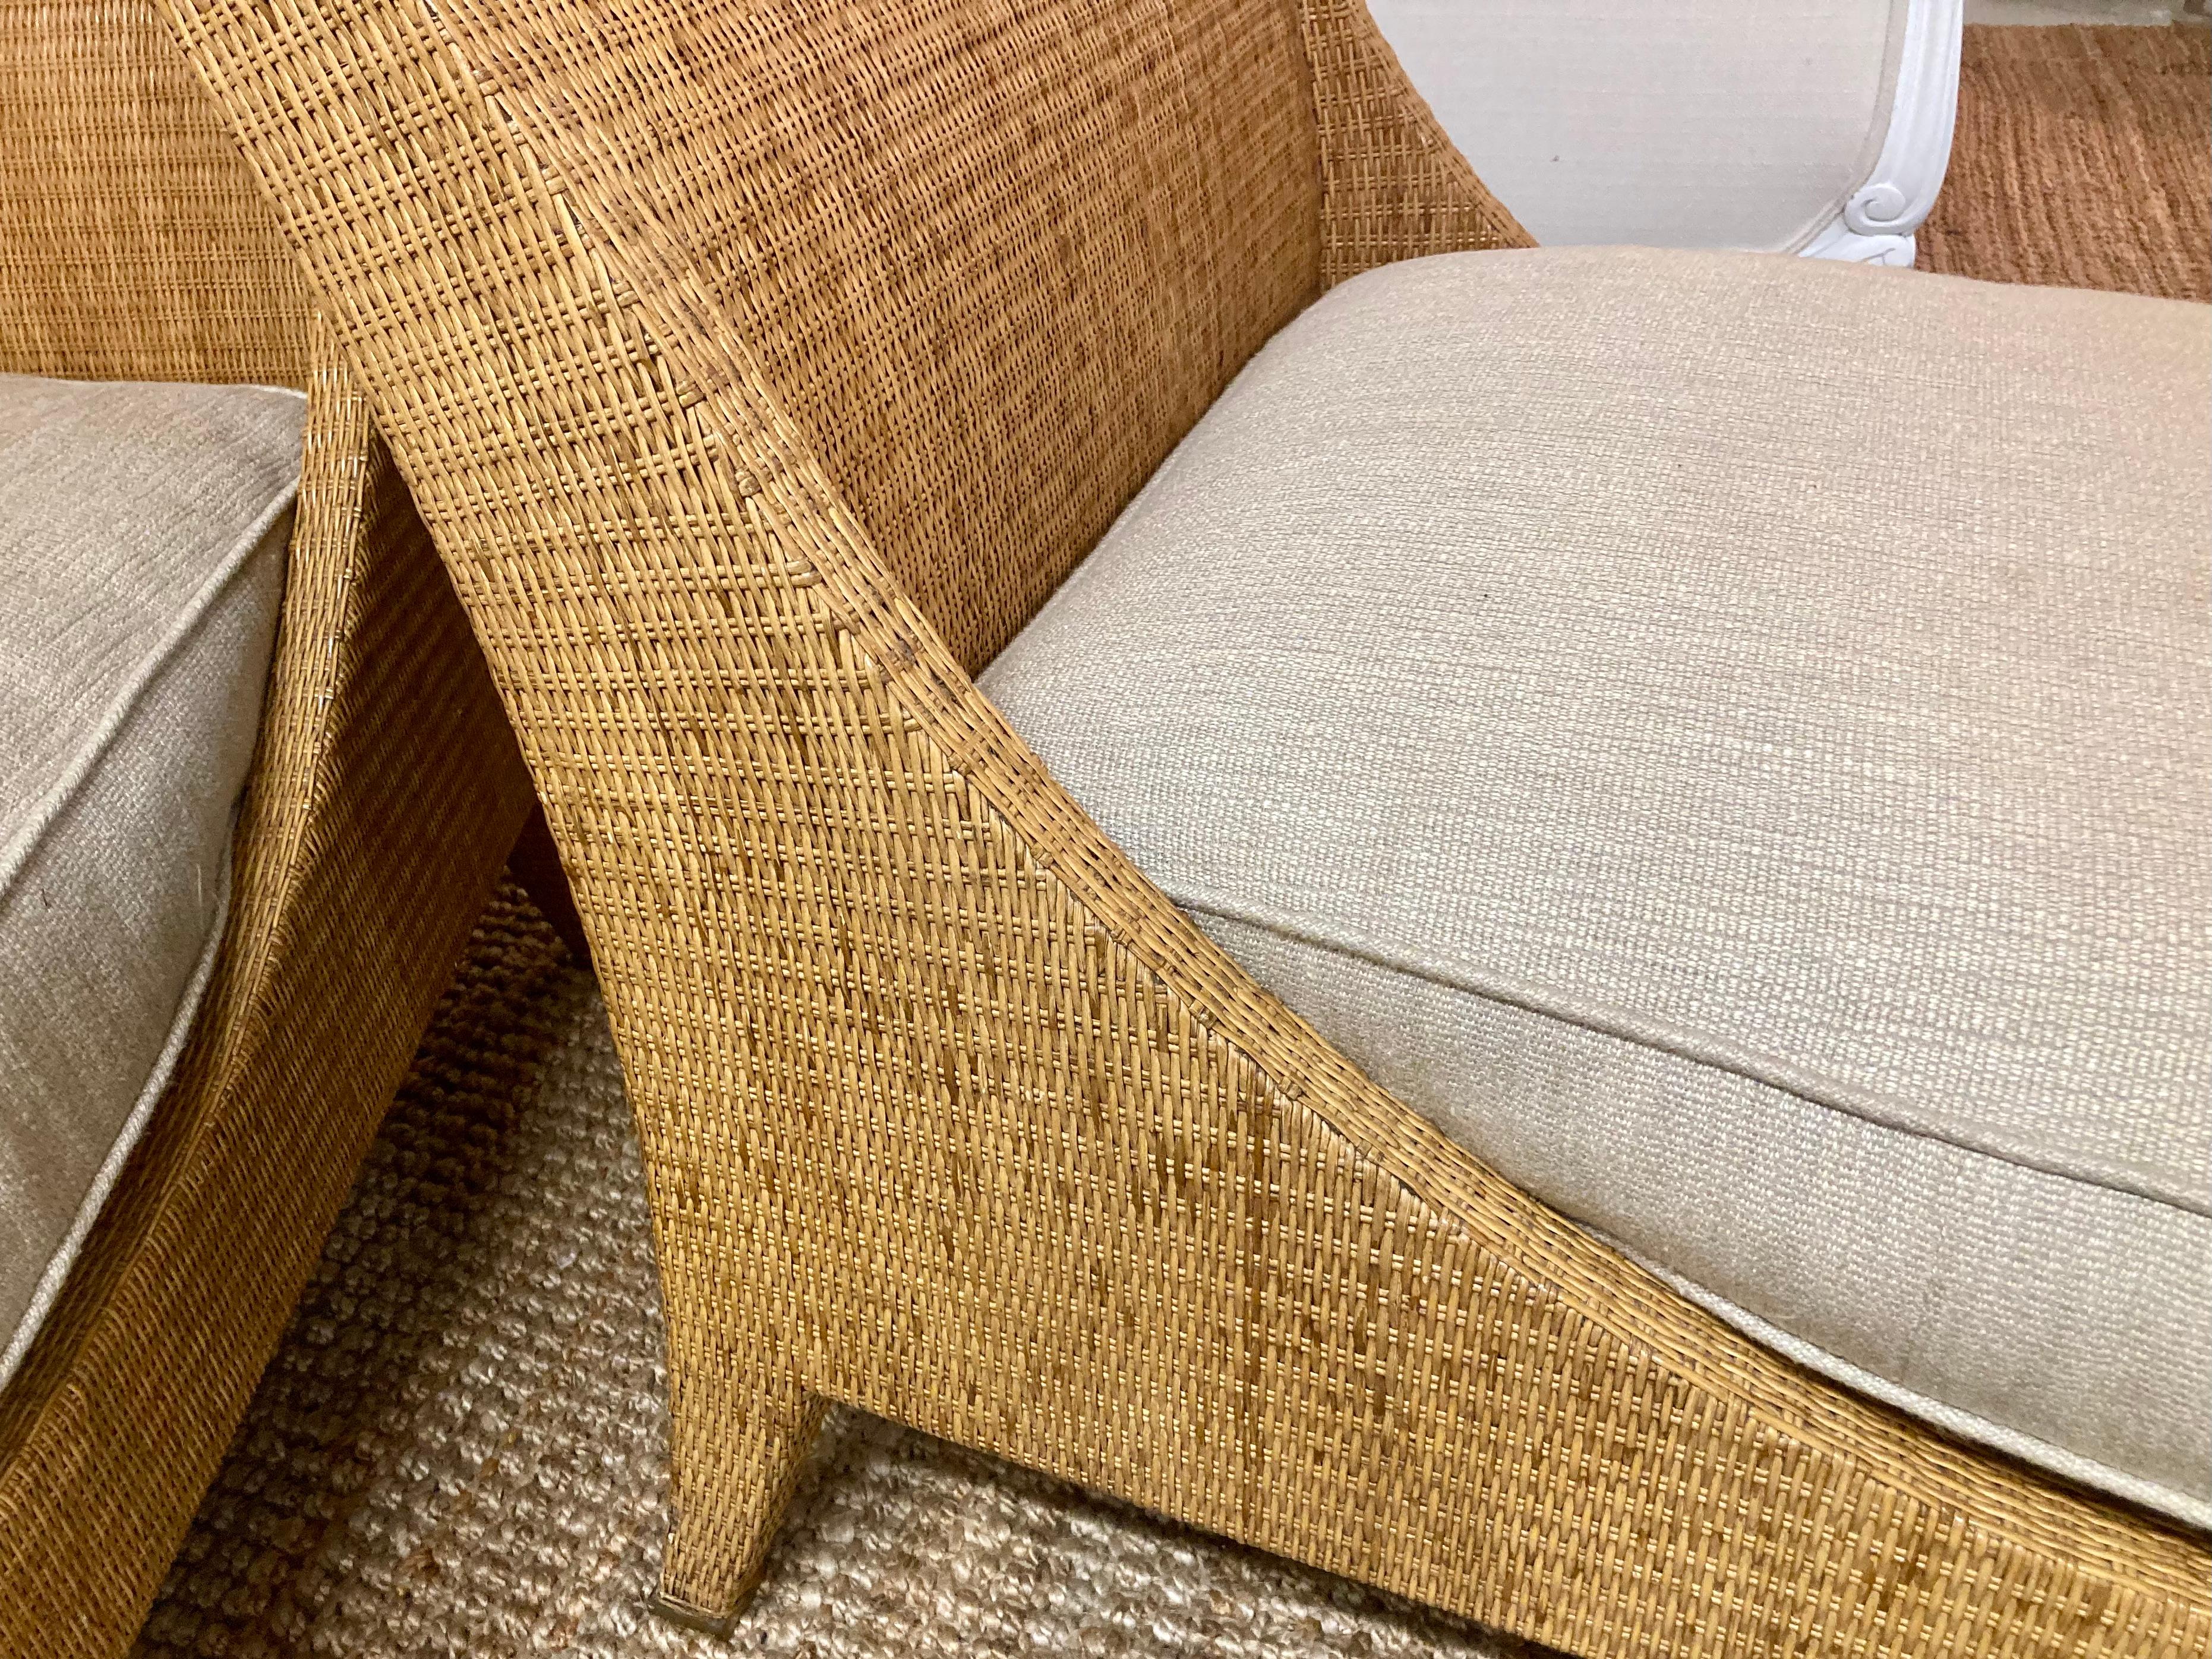 Jacques Garcia for McGuire Woven Raffia Large Club Chairs, a Pair For Sale 3